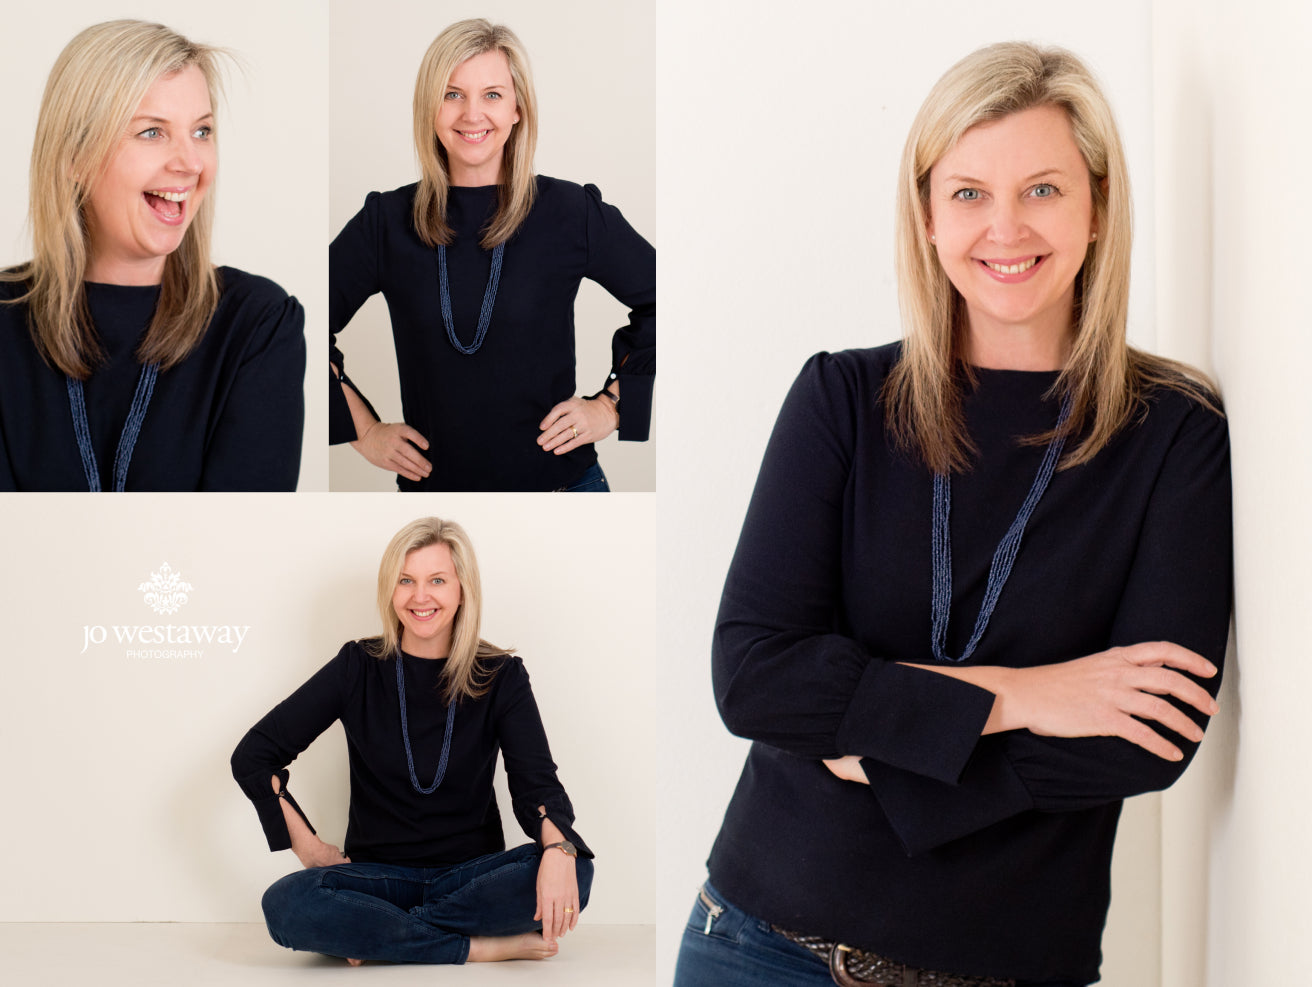 Personal branding - profile photos, headshots and portrait images for business owners